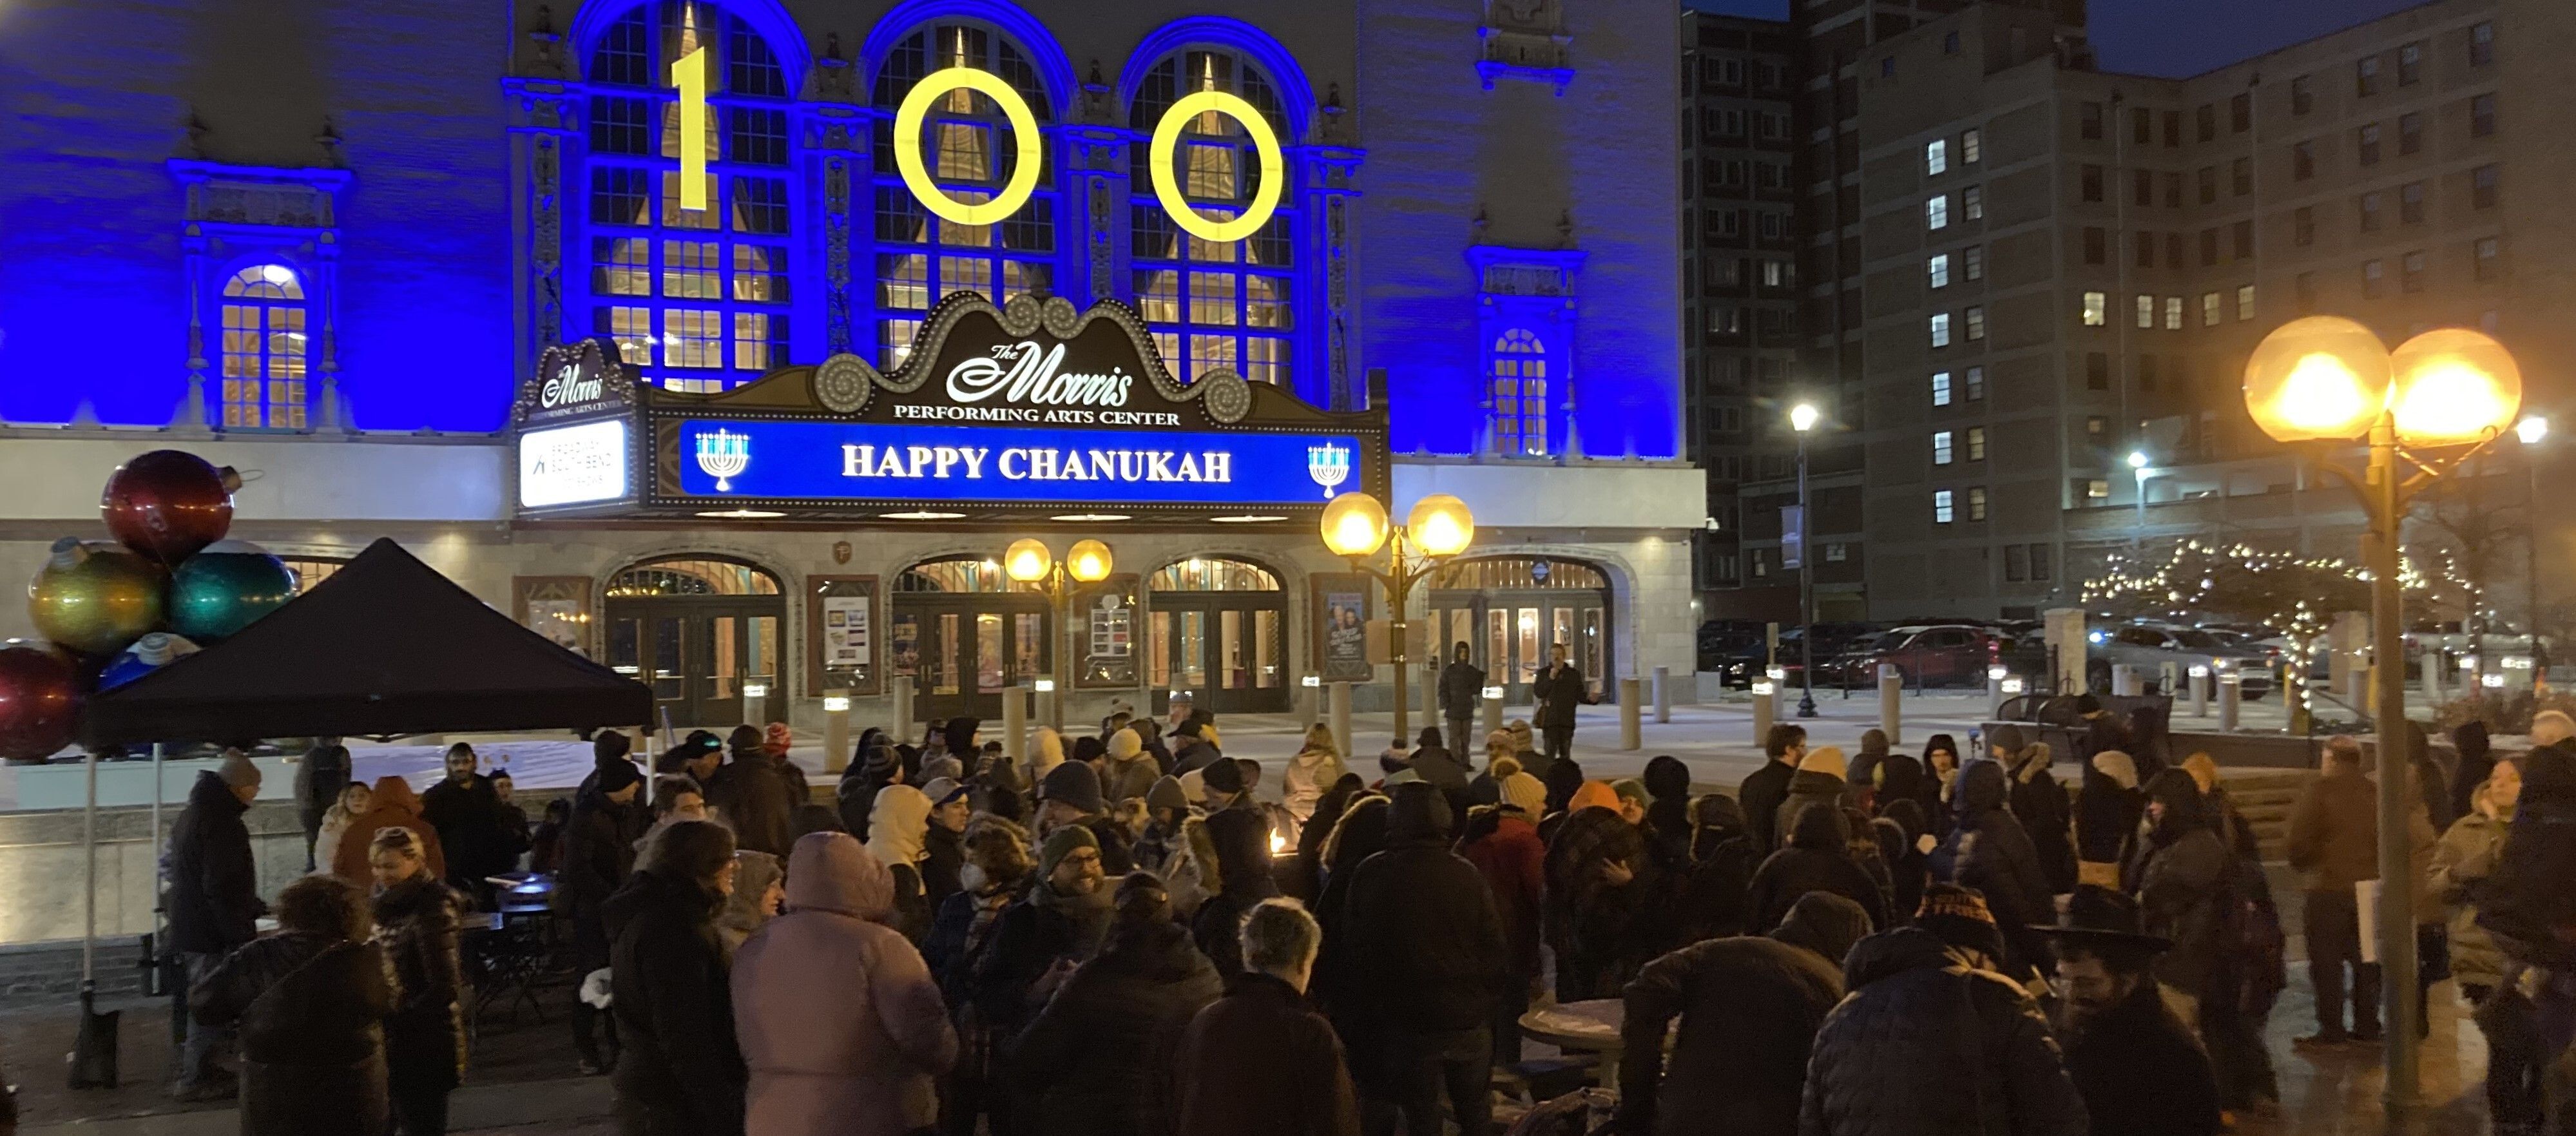 Jewish Community turns out in support of Chanukah in South Bend